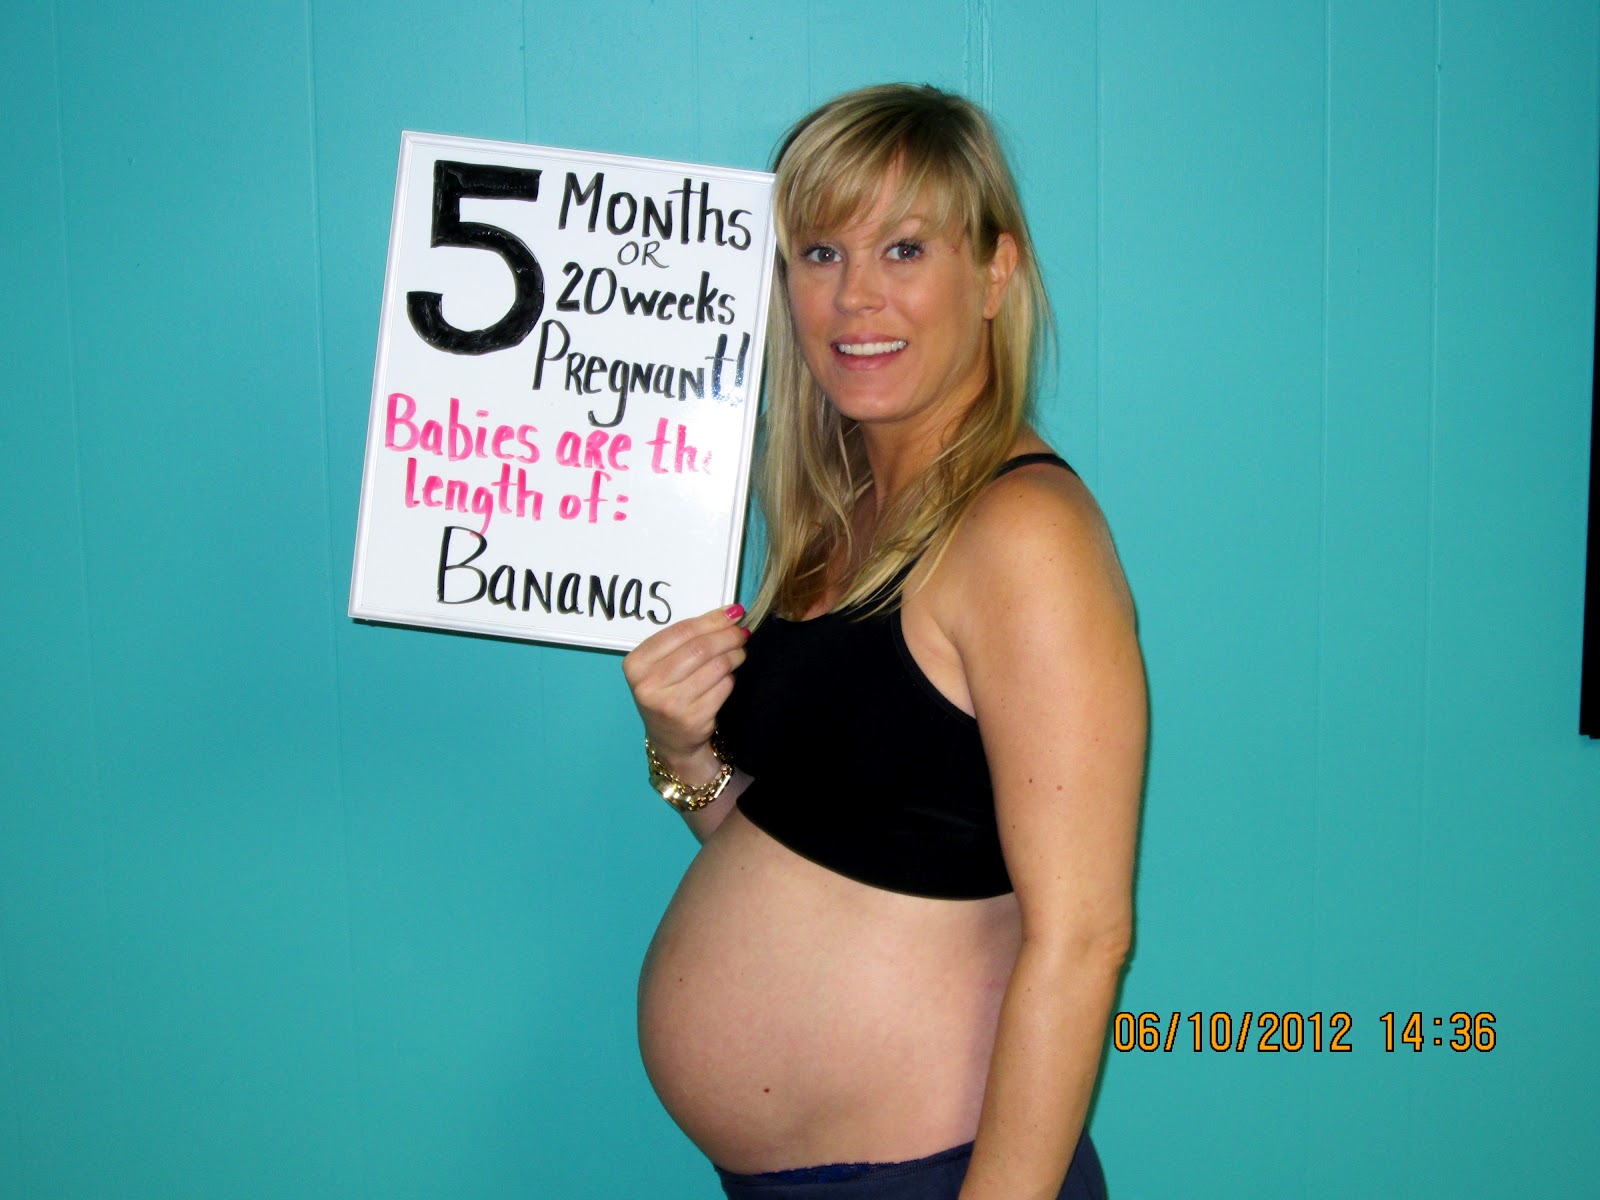 What does a woman look like when she is three to four months pregnant?